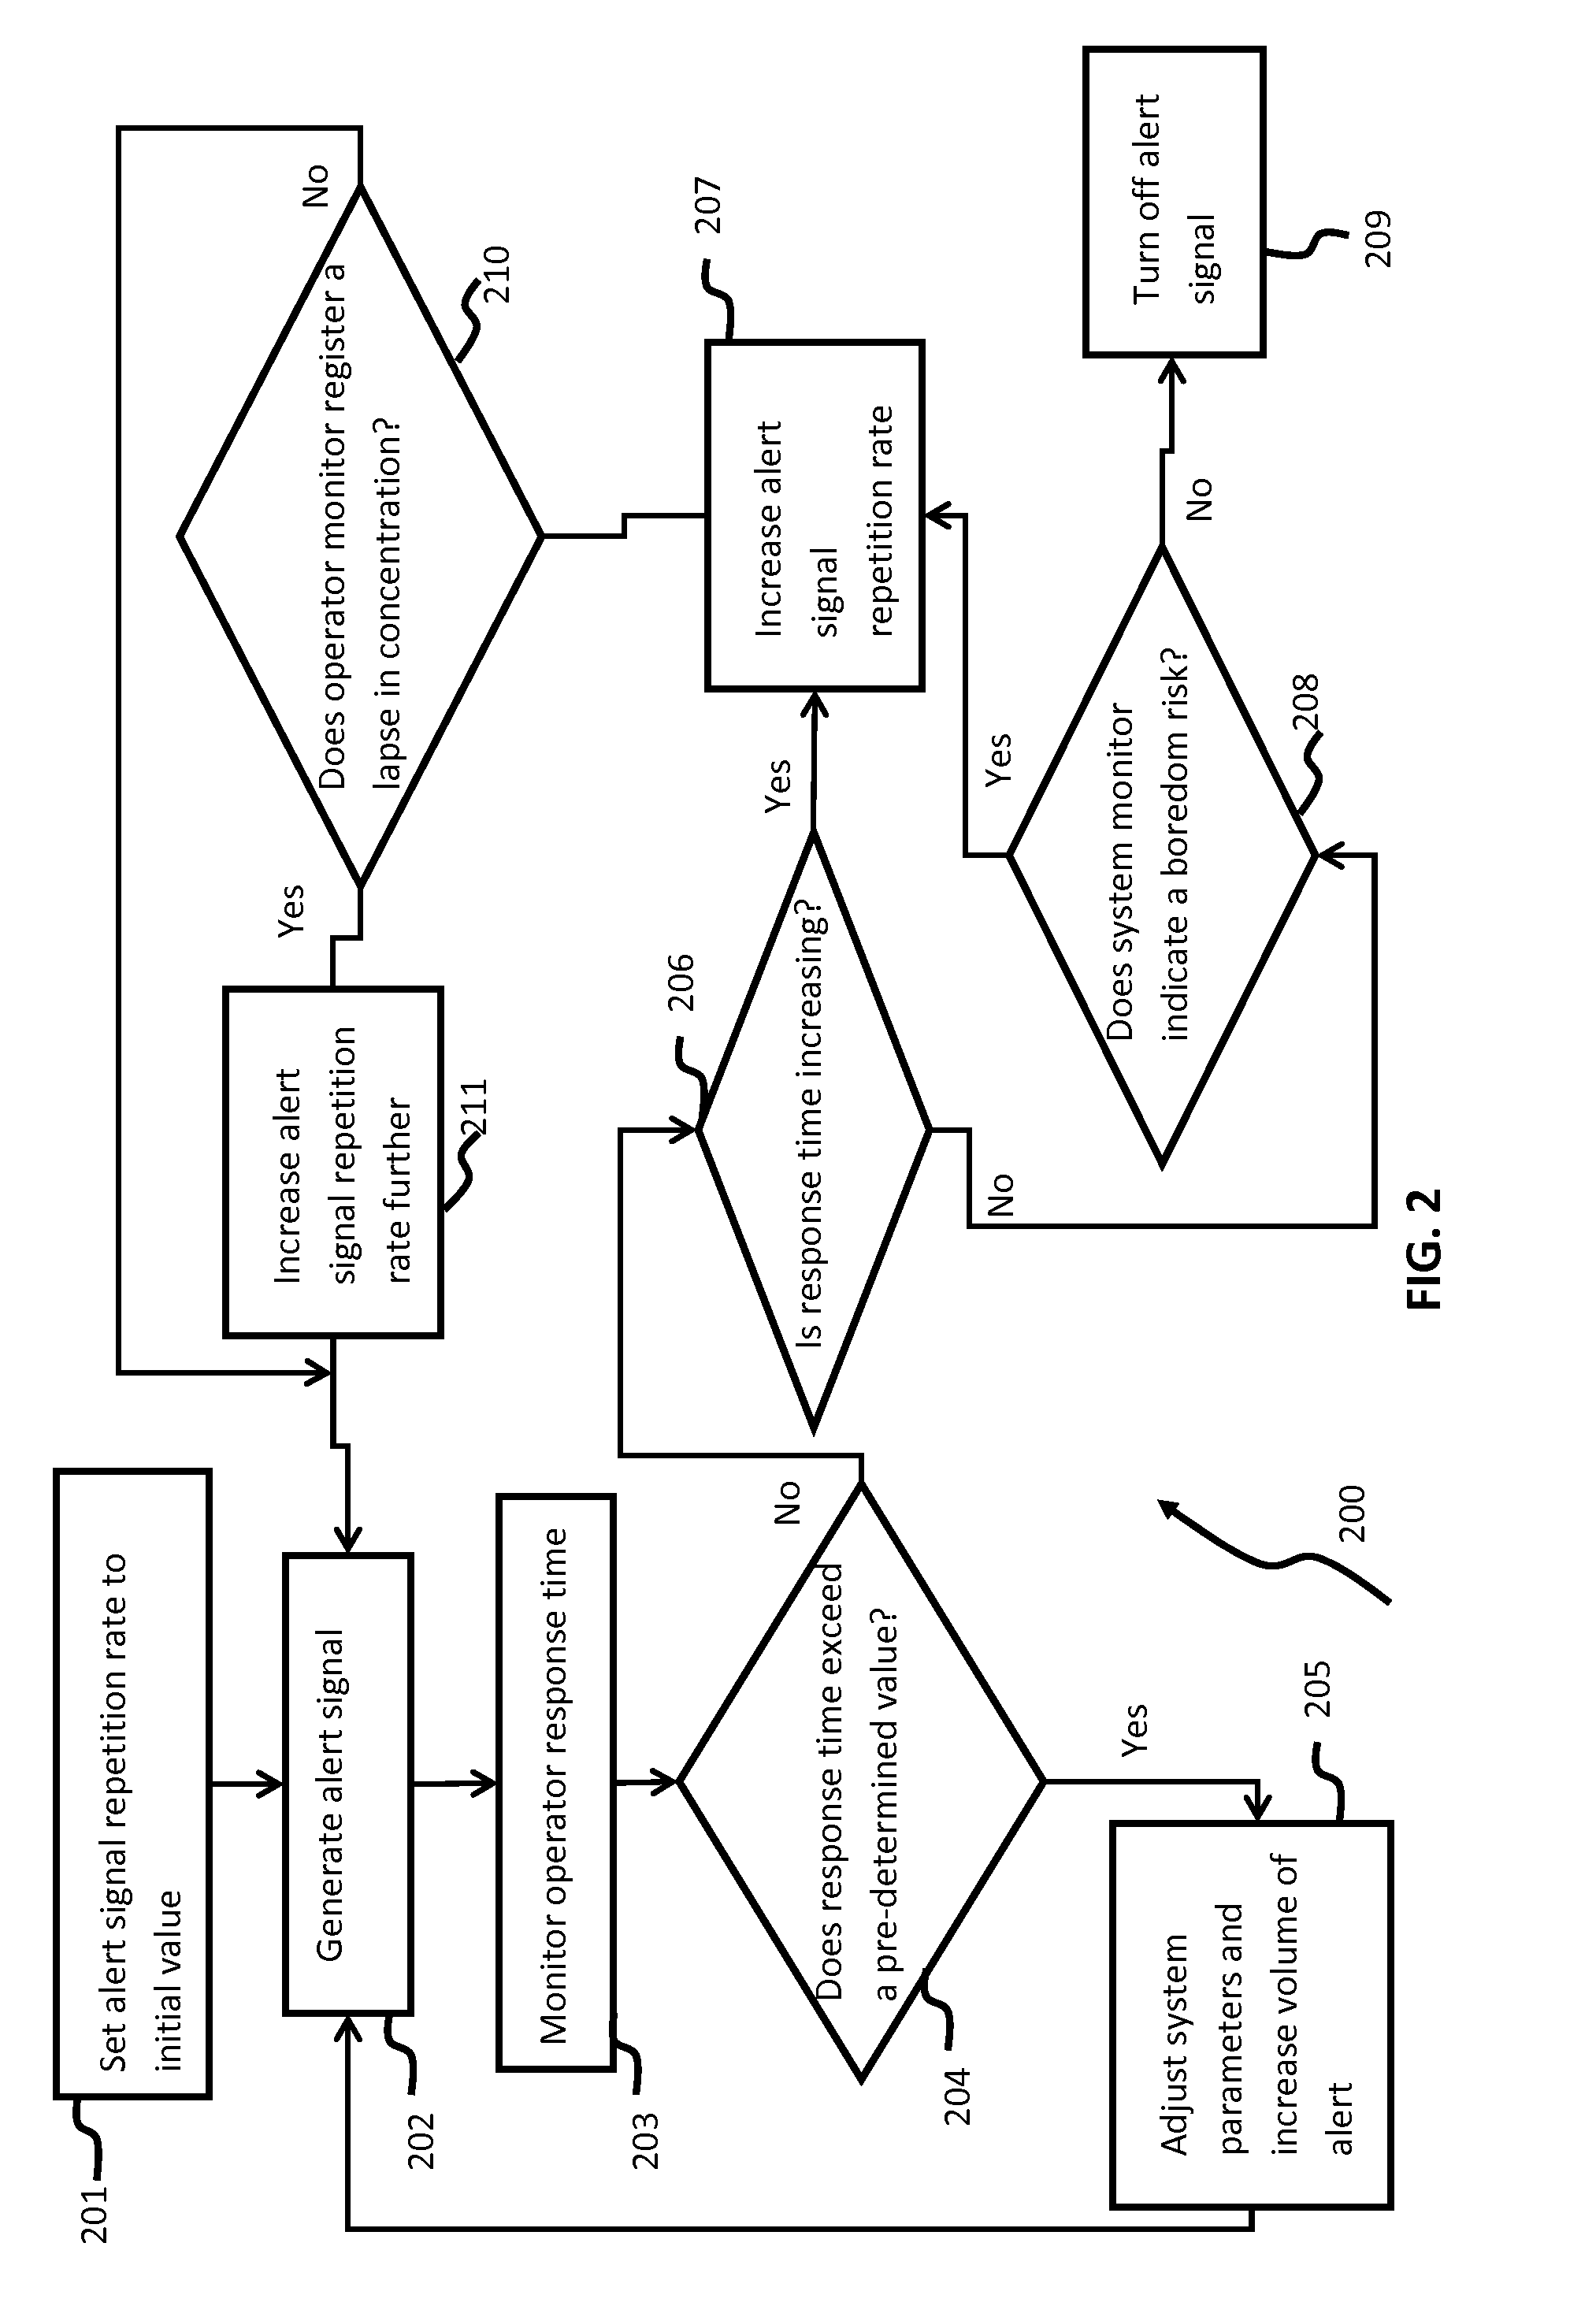 Method and apparatus for maintaining alertness of an operator of a manually-operated system